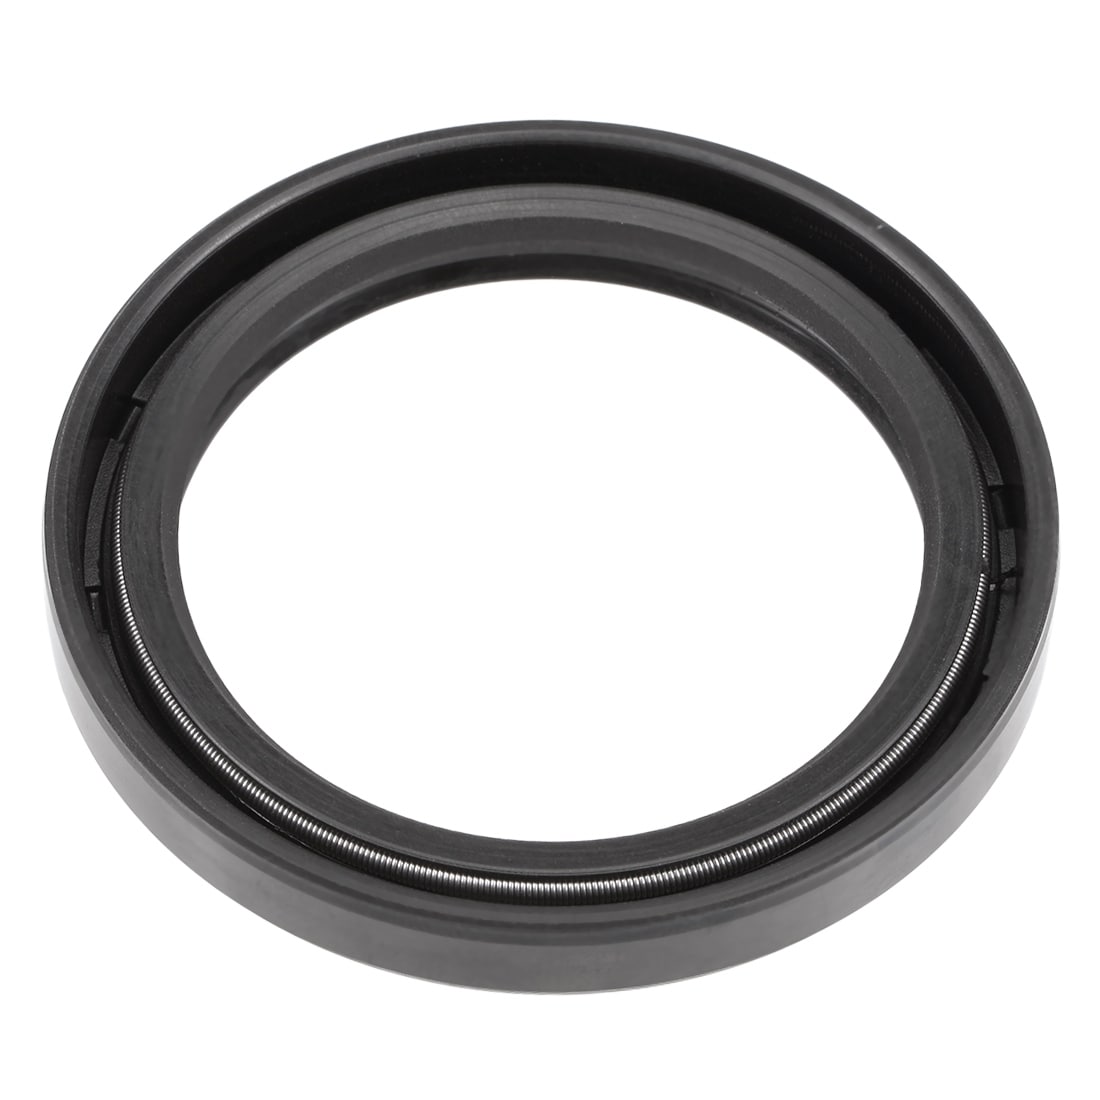 Oil Seal Size 26mm X 38mm X 8mm 2 Pack